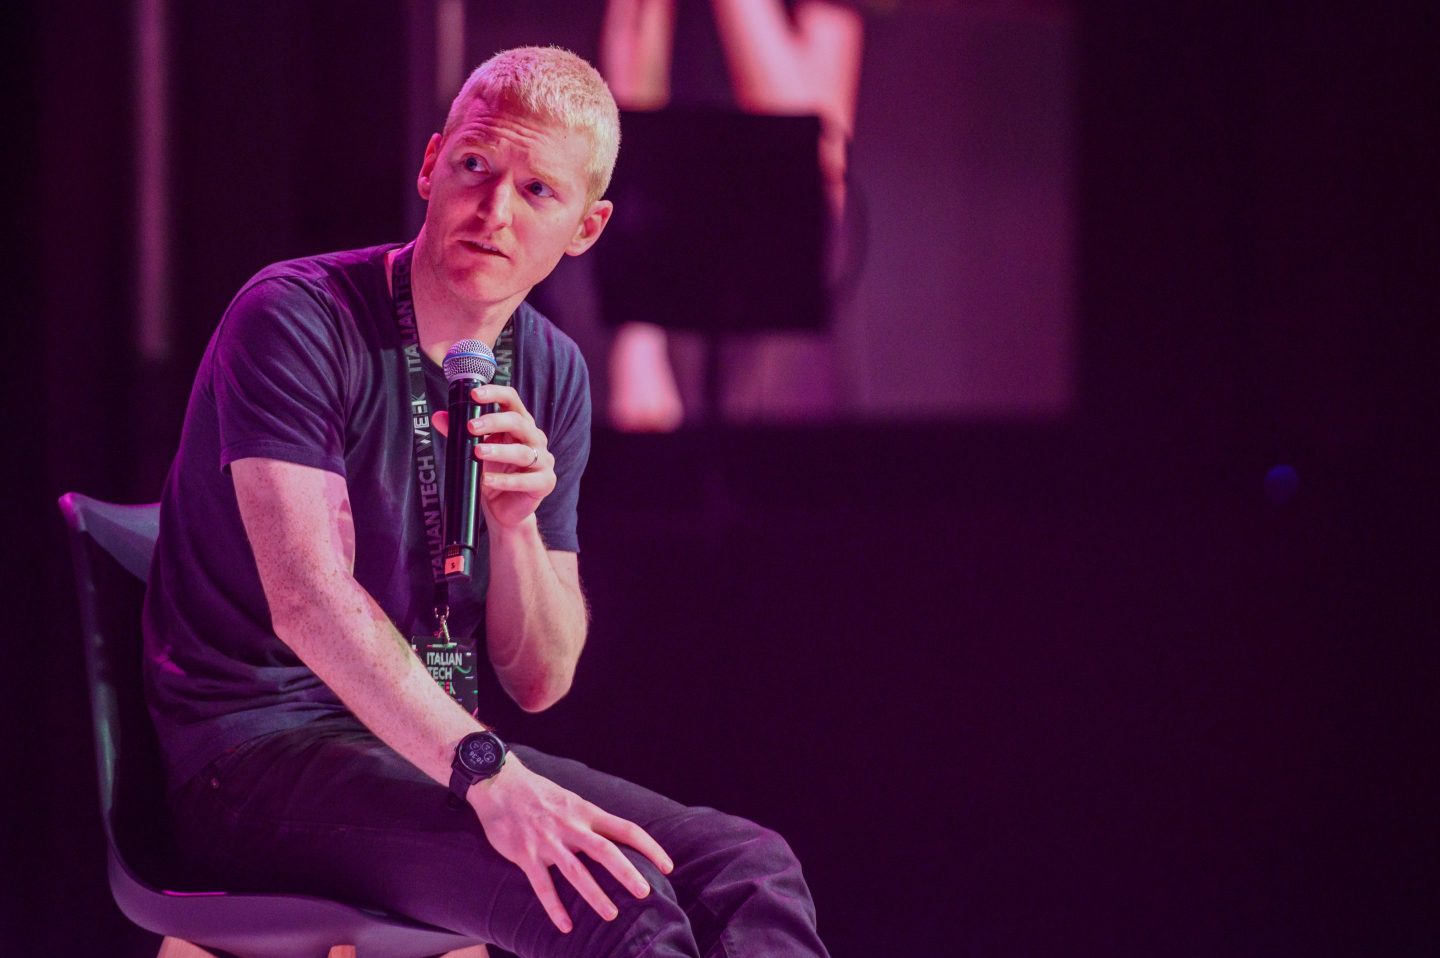 Patrick Collison, chief executive officer of Stripe Inc., speaks at the Italian Tech Week forum in Turin, Italy.